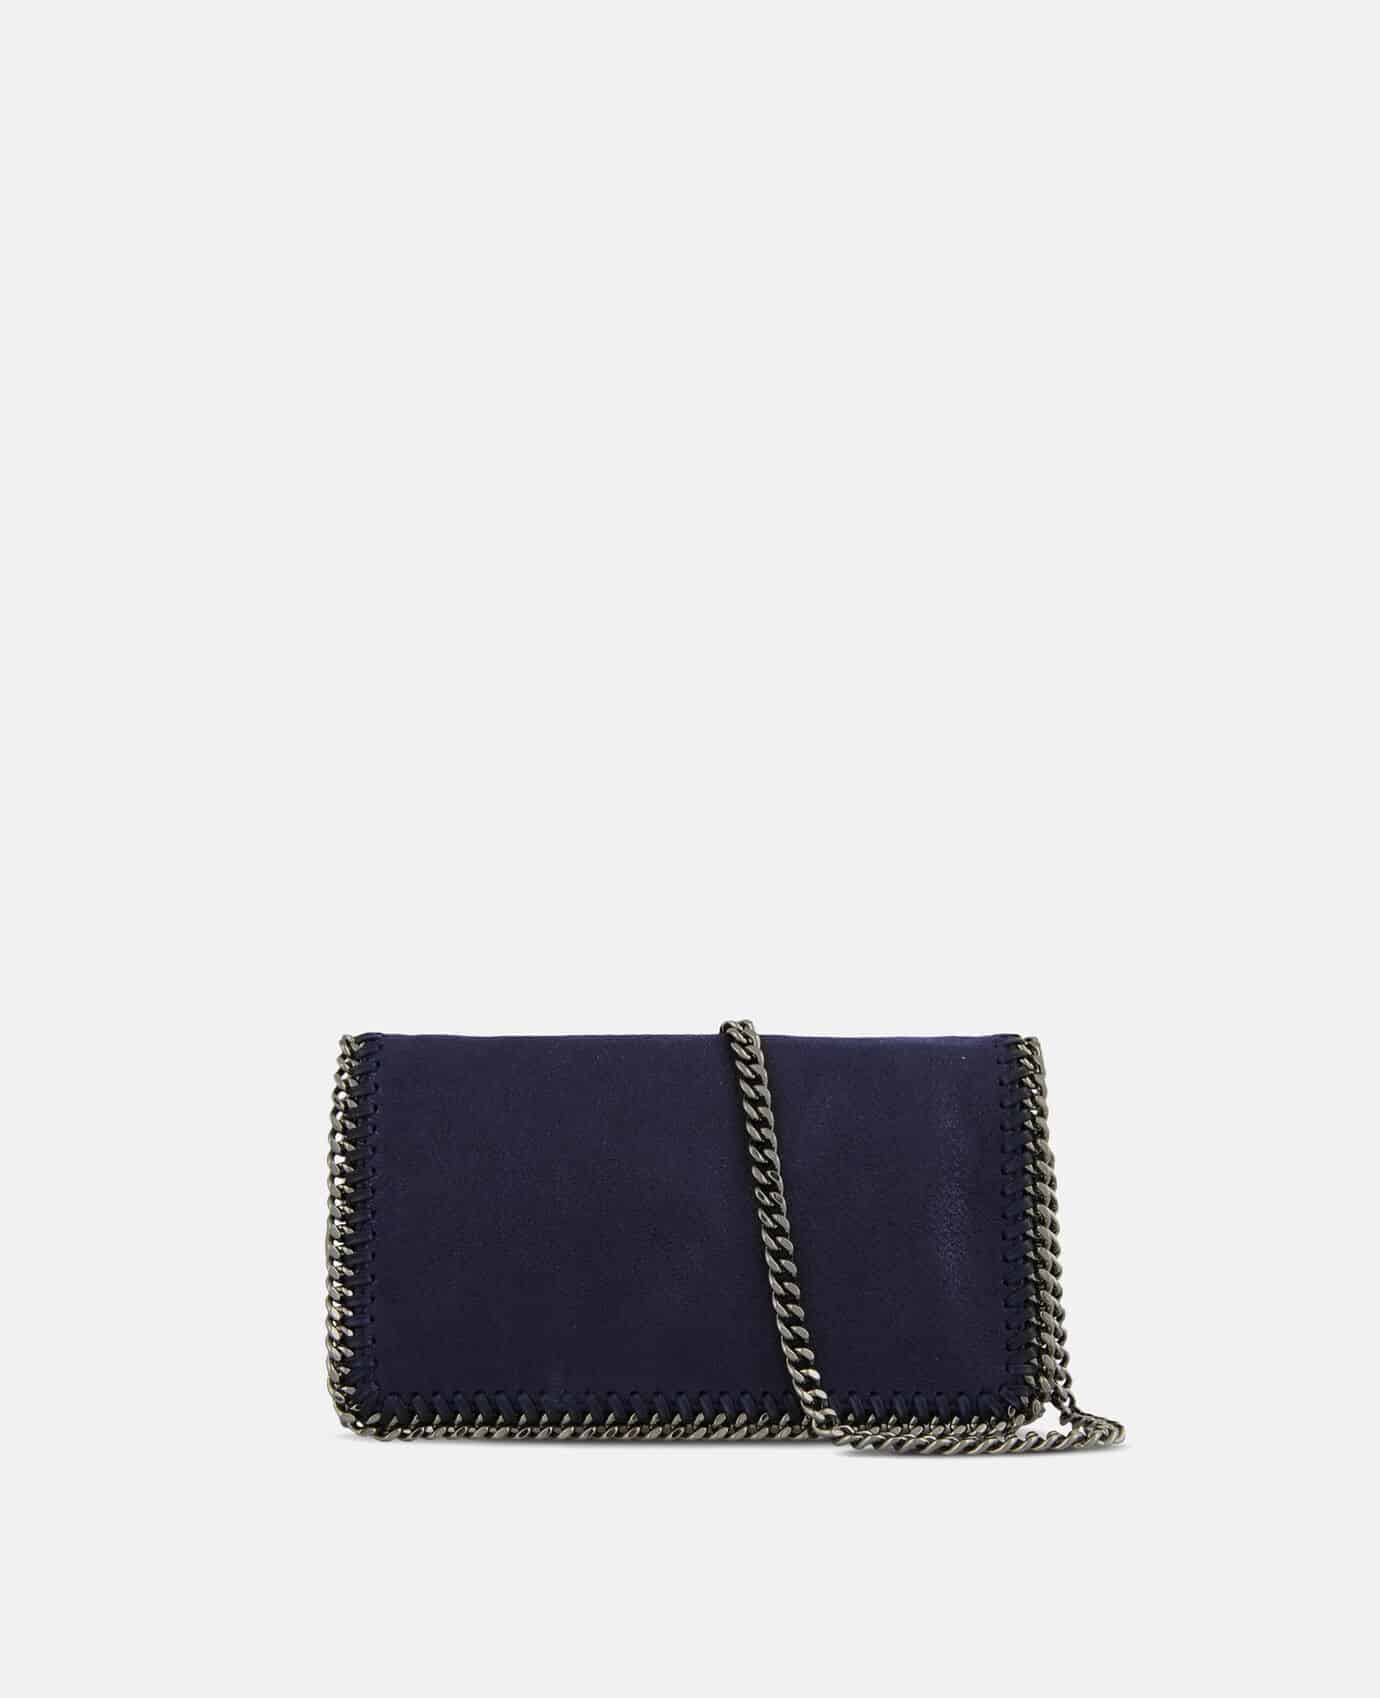 Iconic Falabella bag made from vegan black leather from Stella McCartney